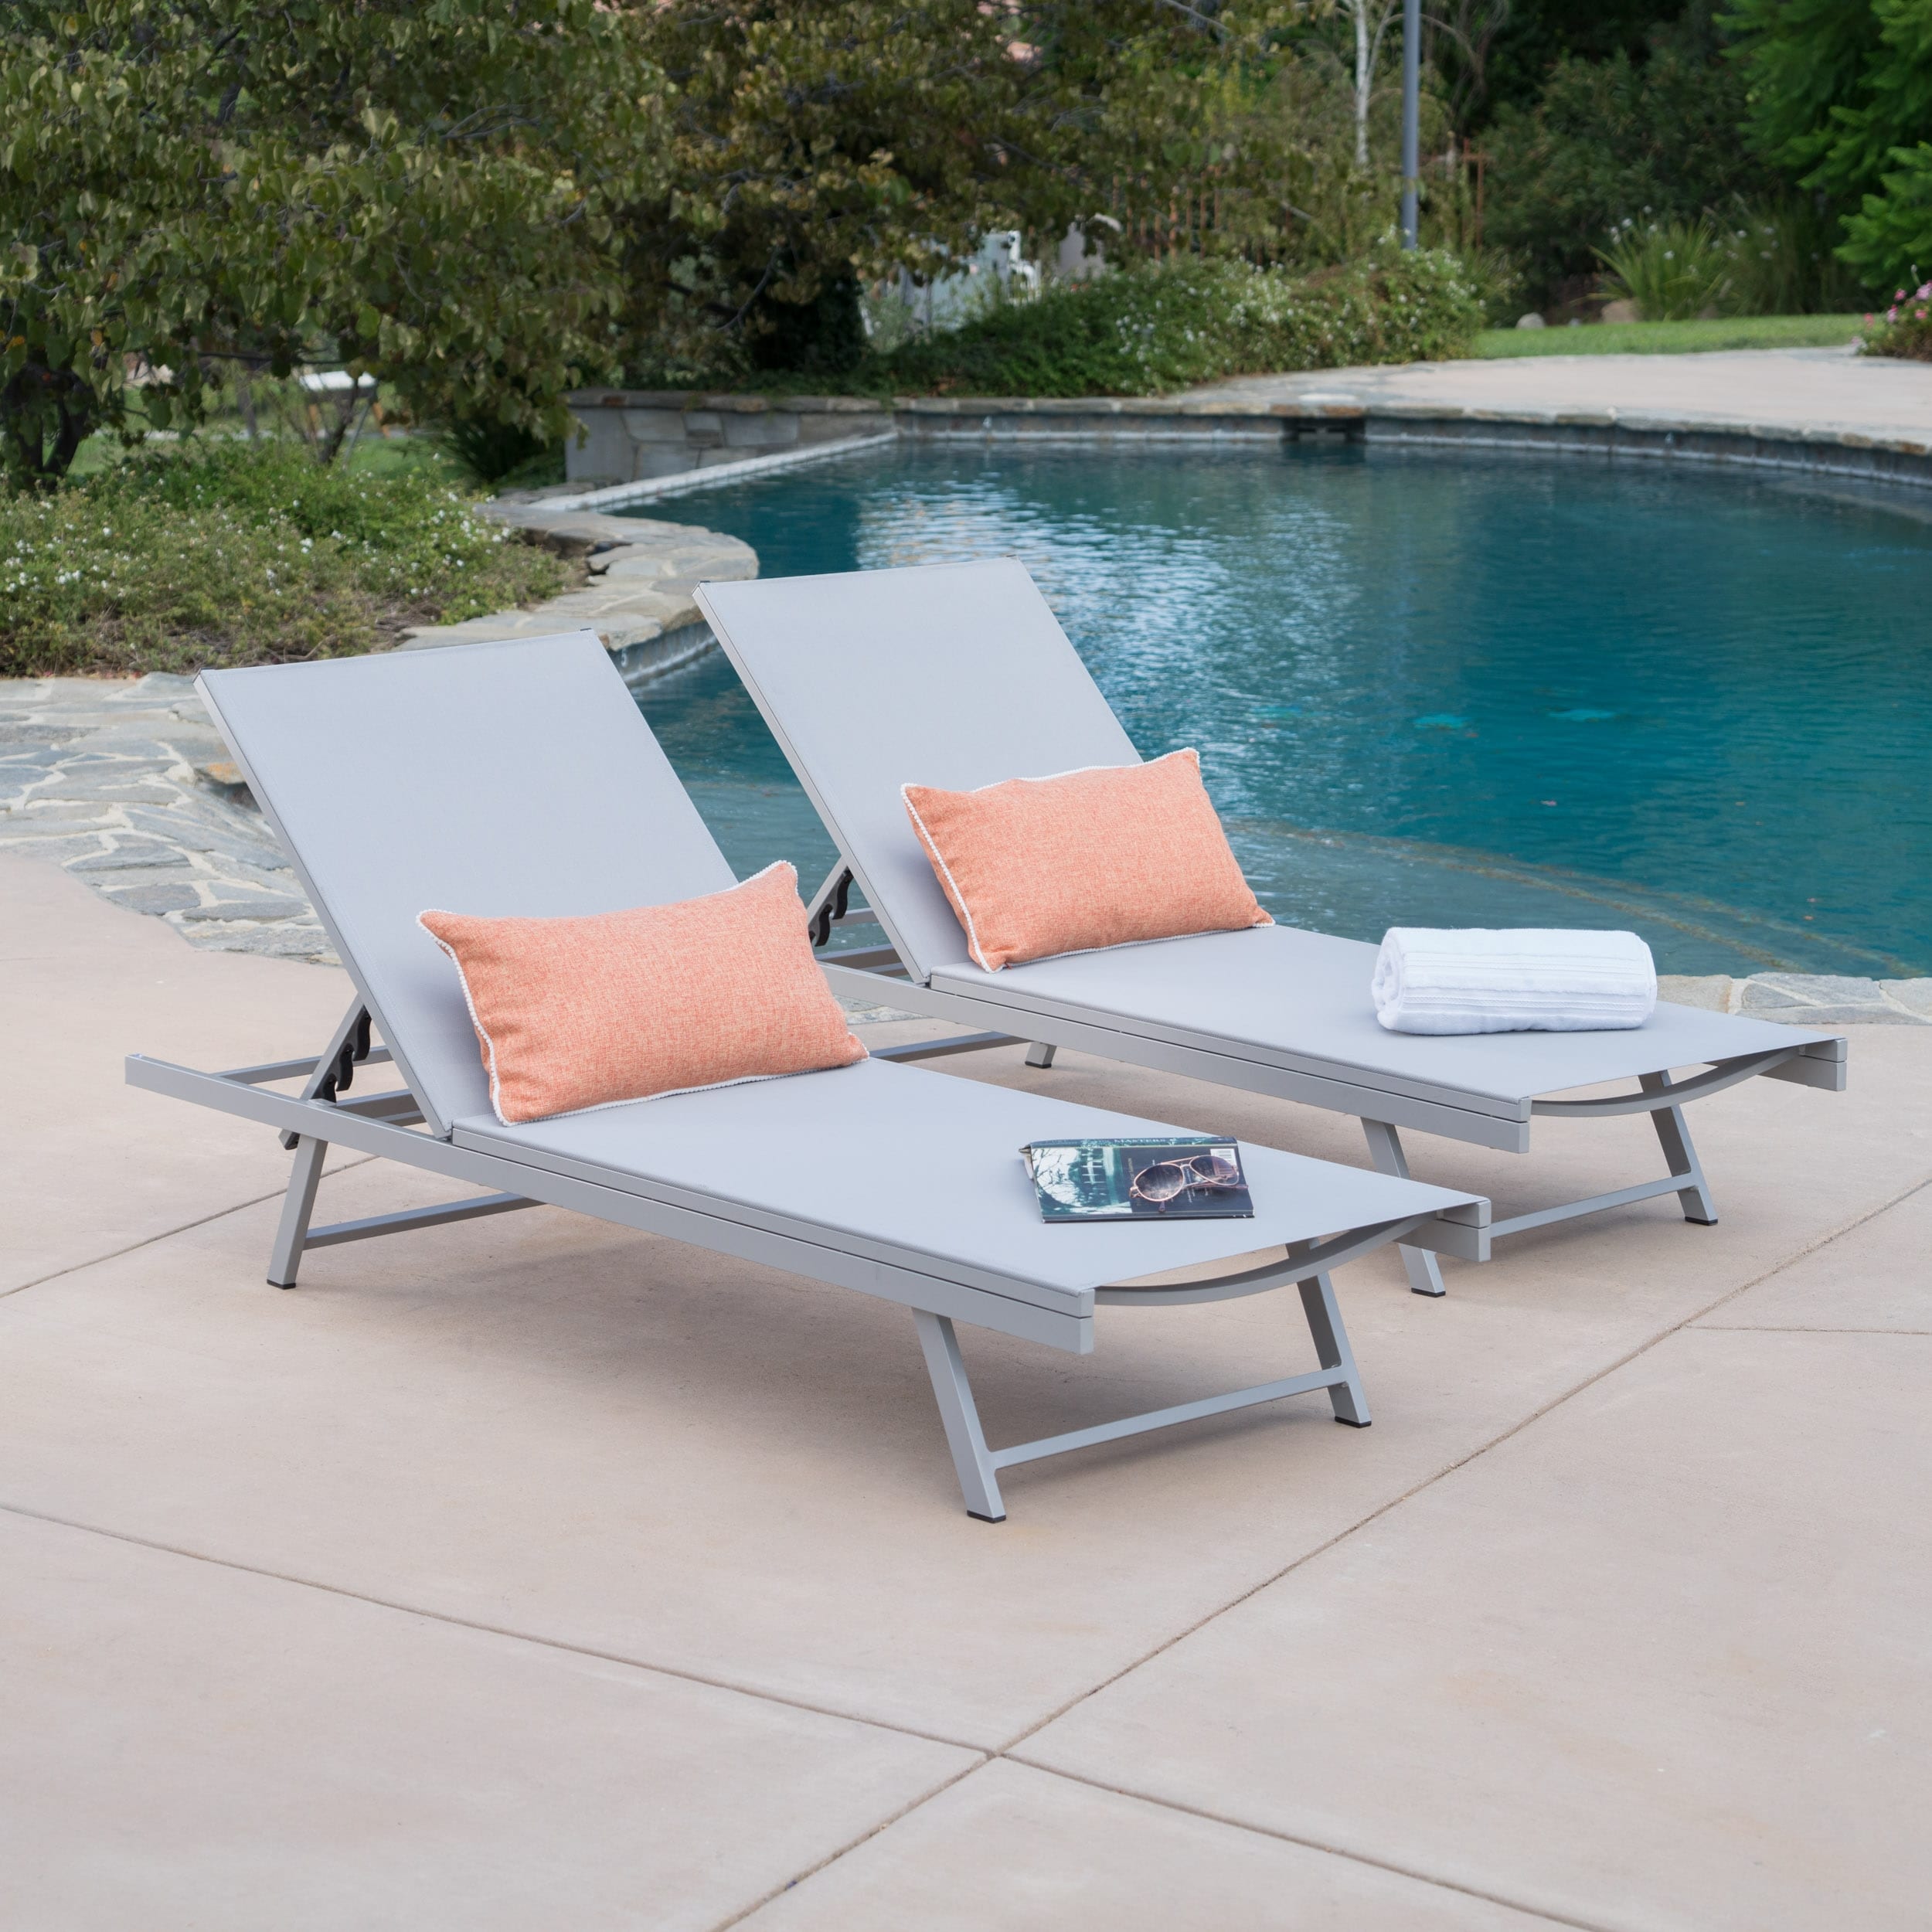 Salton Outdoor Aluminum Chaise Lounge With Mesh Seating (set Of 2) By Christopher Knight Home